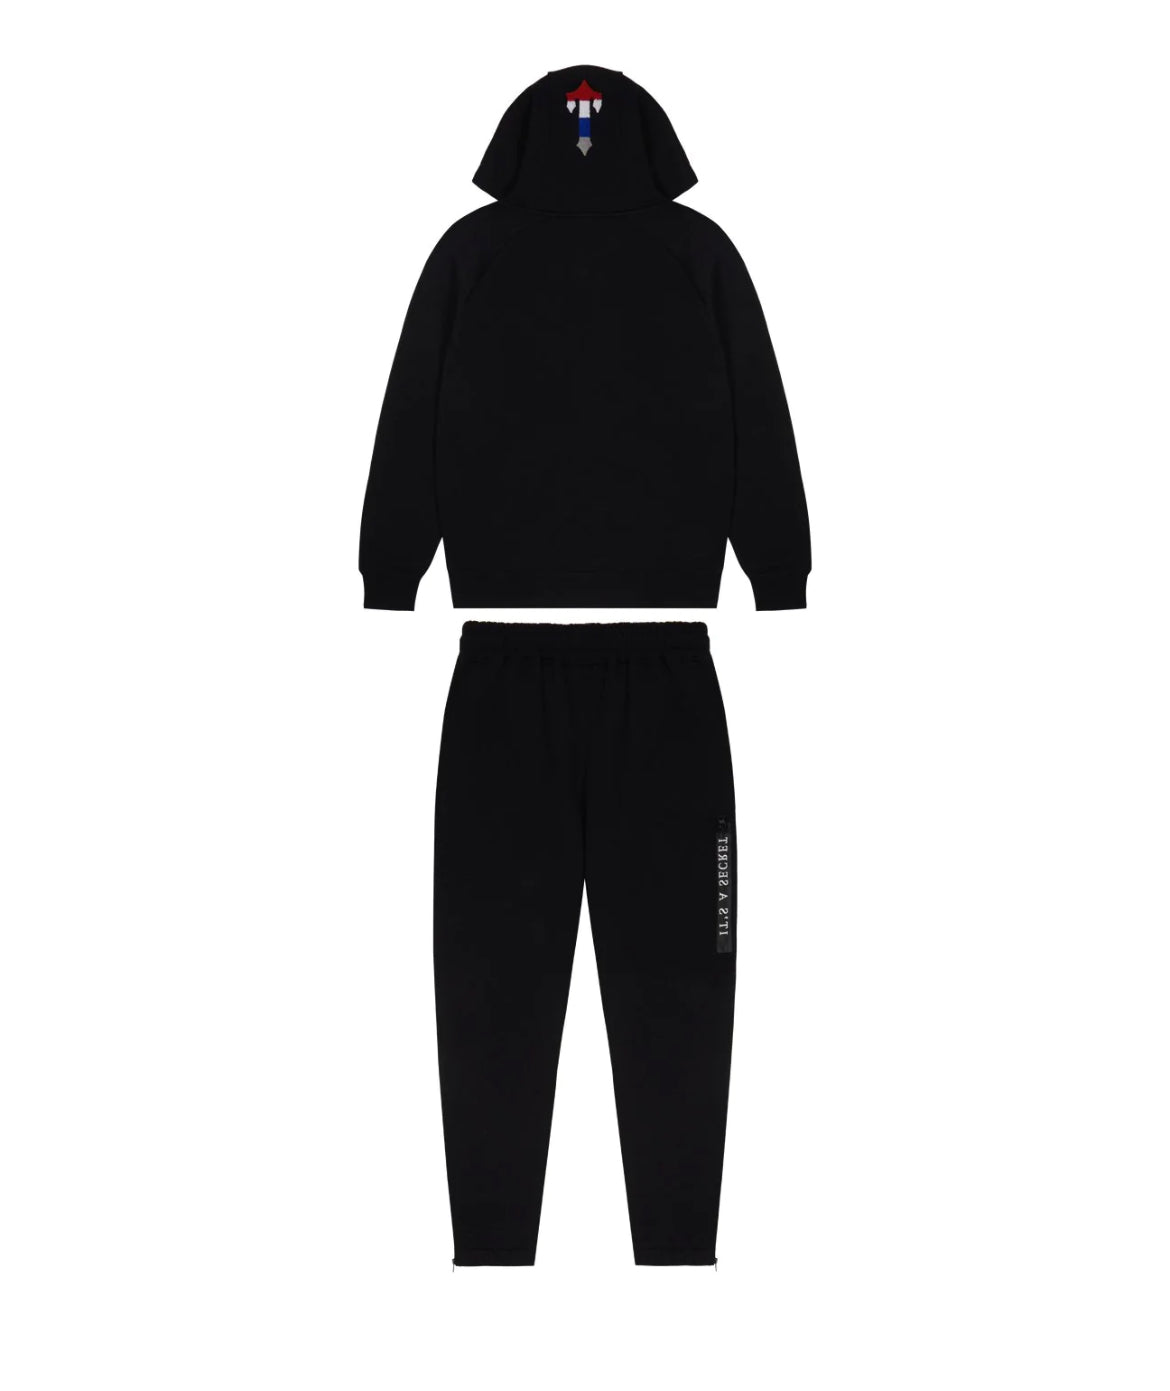 Trapstar Chenille Decoded 2.0 Hooded Tracksuit - BLACK REVOLUTION EDITION (FAST DELIVERY)